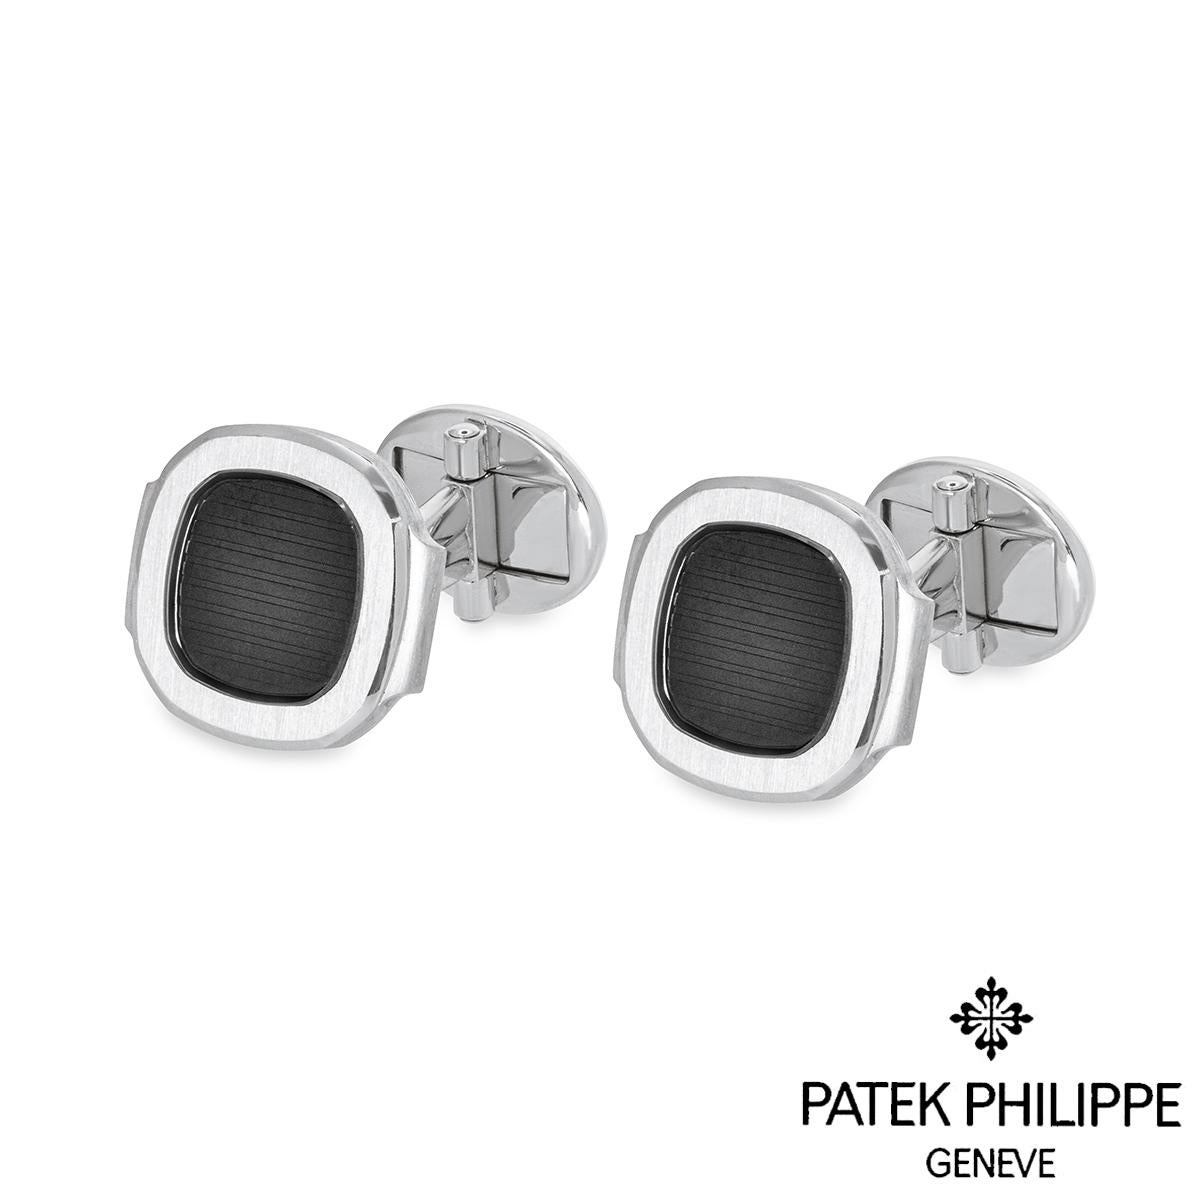 A stylish pair of 18k white gold cufflinks by Patek Philippe from the Nautilus collection. The cufflinks are set with the signature black-grey Nautilus panel surrounded by a satin finish border. The cufflinks measure 1.6cm in width, 1.5cm in height,